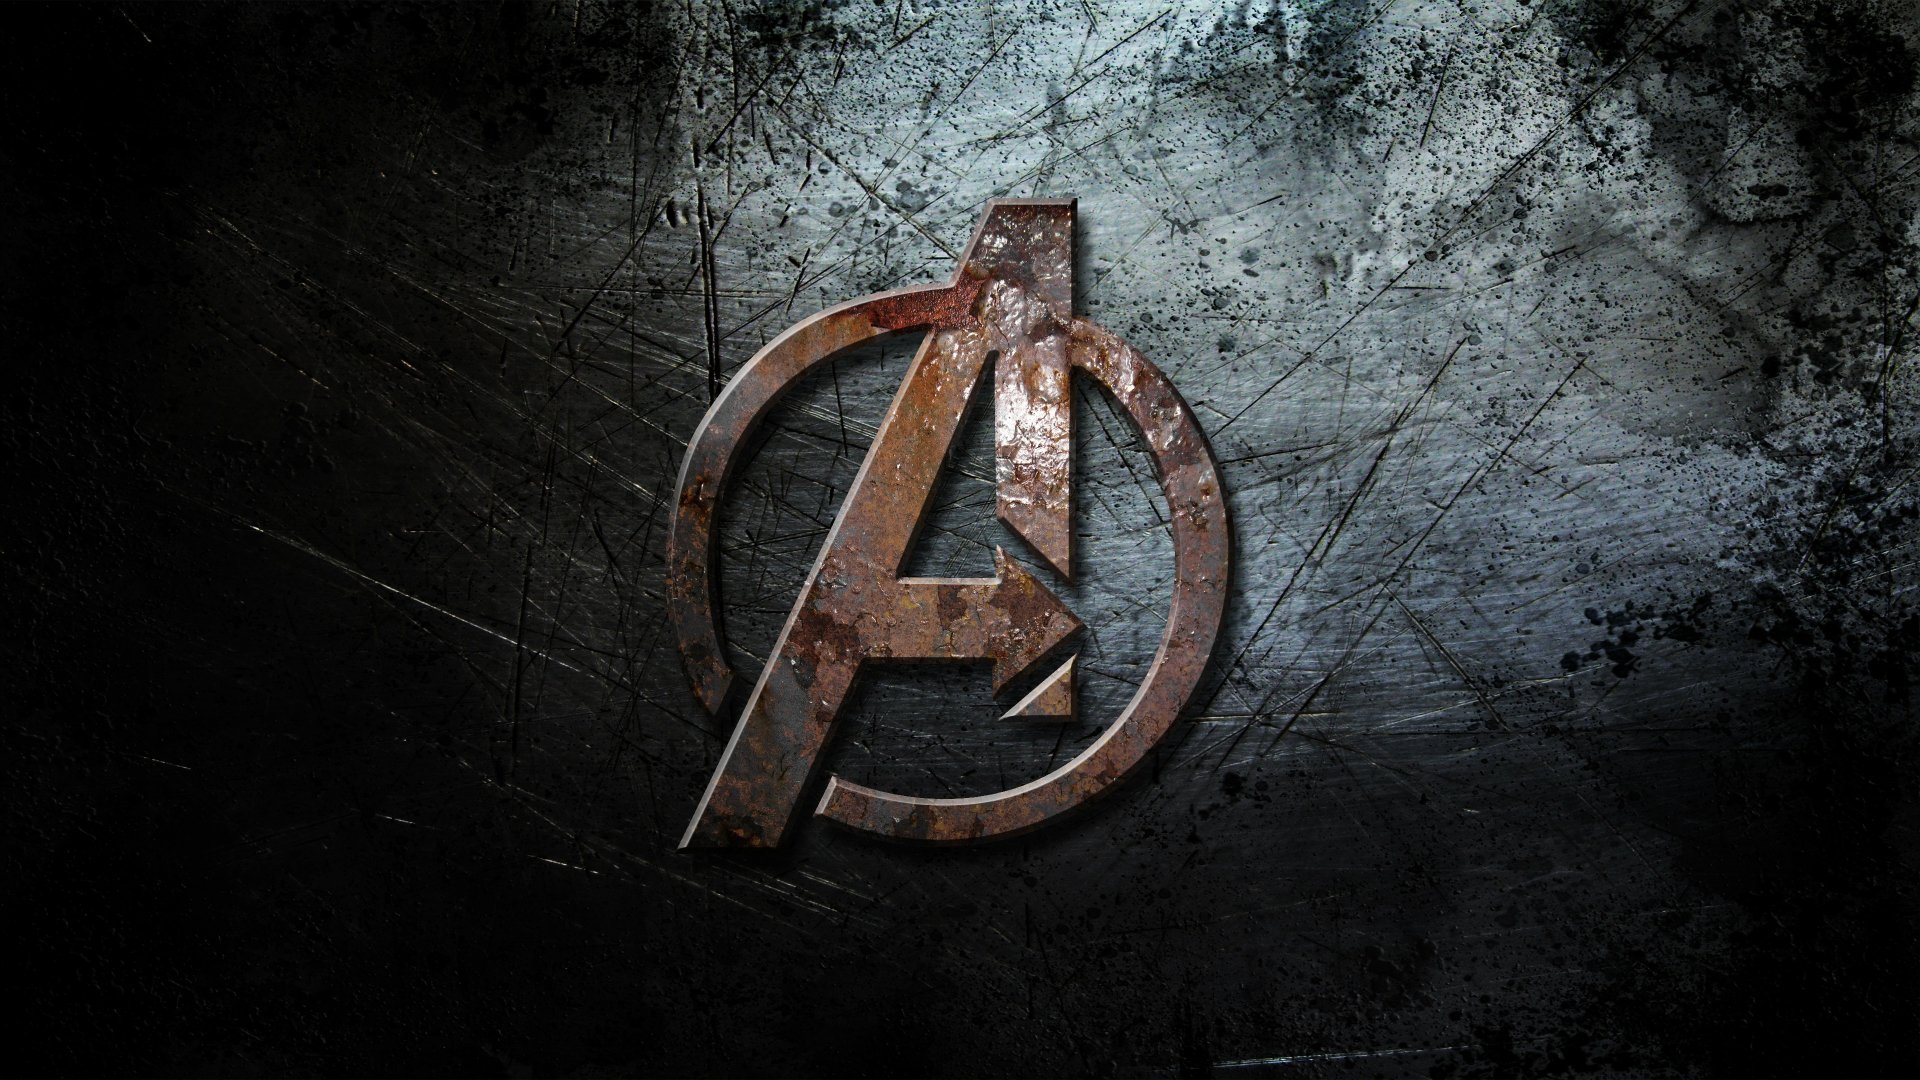 The Avengers for windows download free